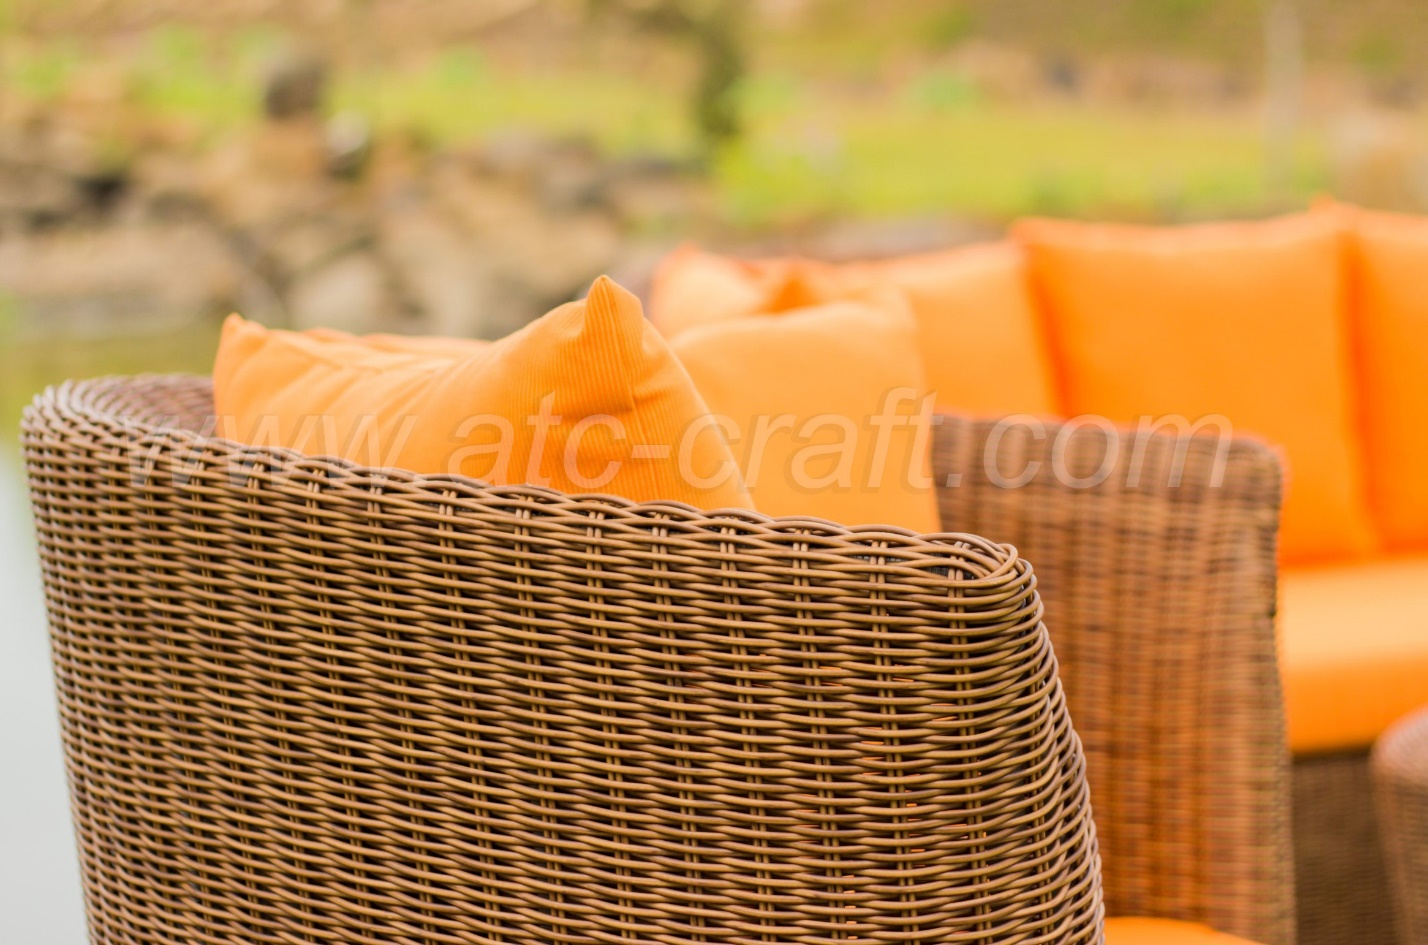 Outdoor living room furniture with a warm brown tone creates a rustic country style